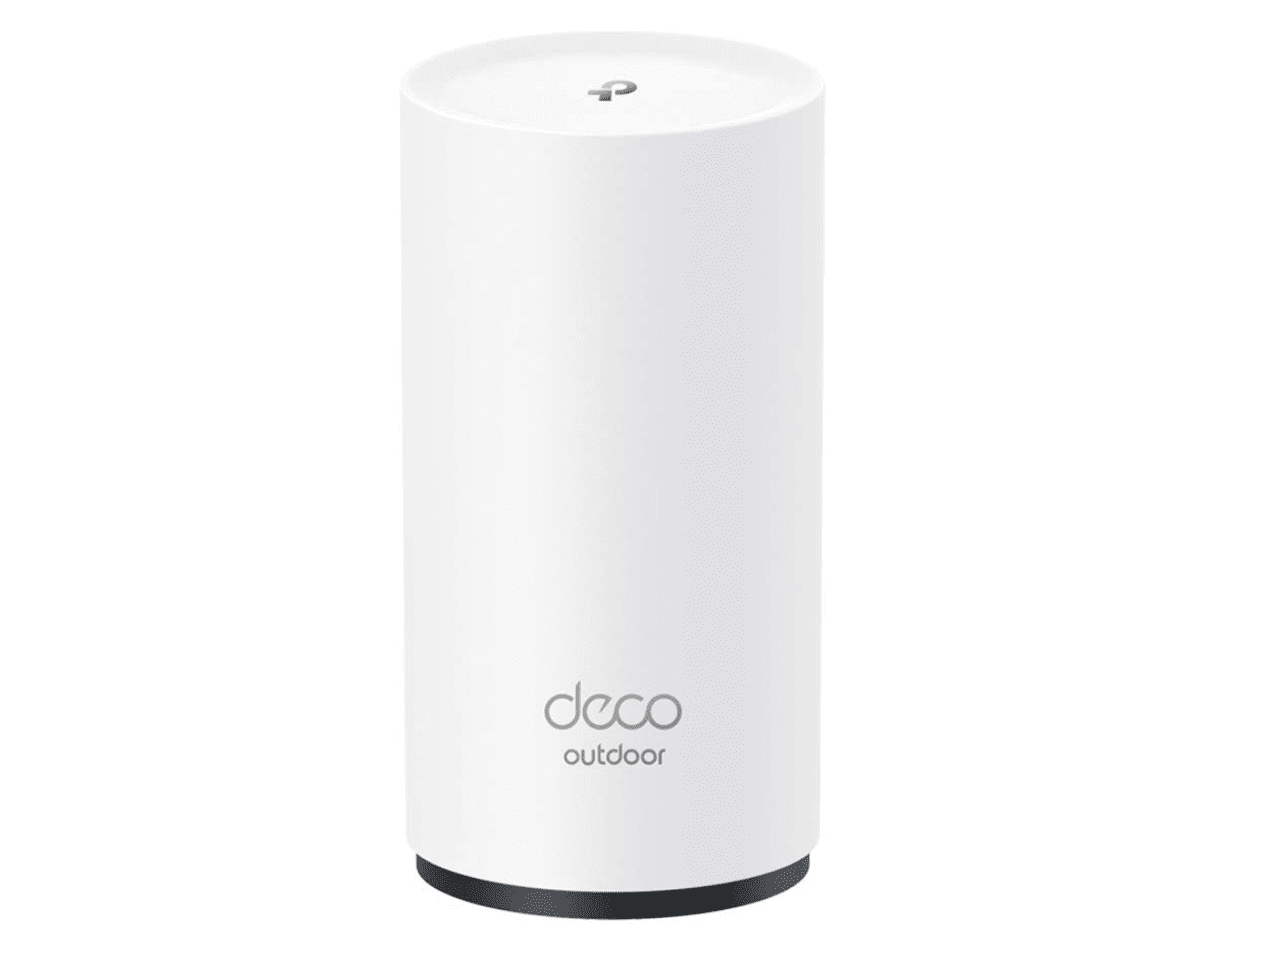 TP-LINK AX3000 Outdoor/Indoor Mesh Deco X50-Outdoor(1-pack) Wi-Fi 6 Unit -  Ecomedia AG